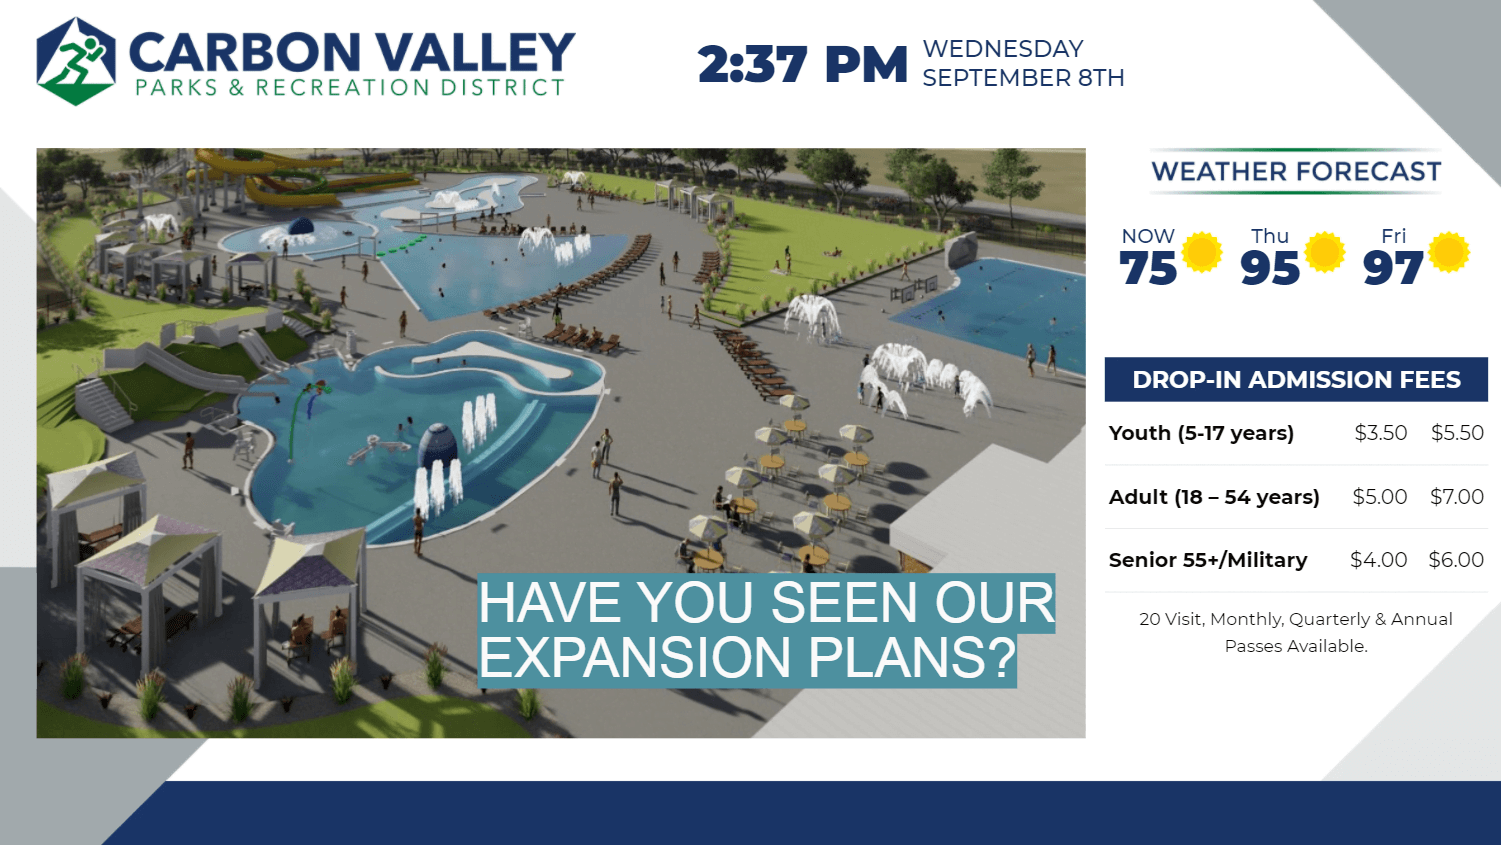 White, blue, and green parks and rec digital signage displaying plan info, weather forecasts, and admission fees for Carbon Valley Parks and Rec